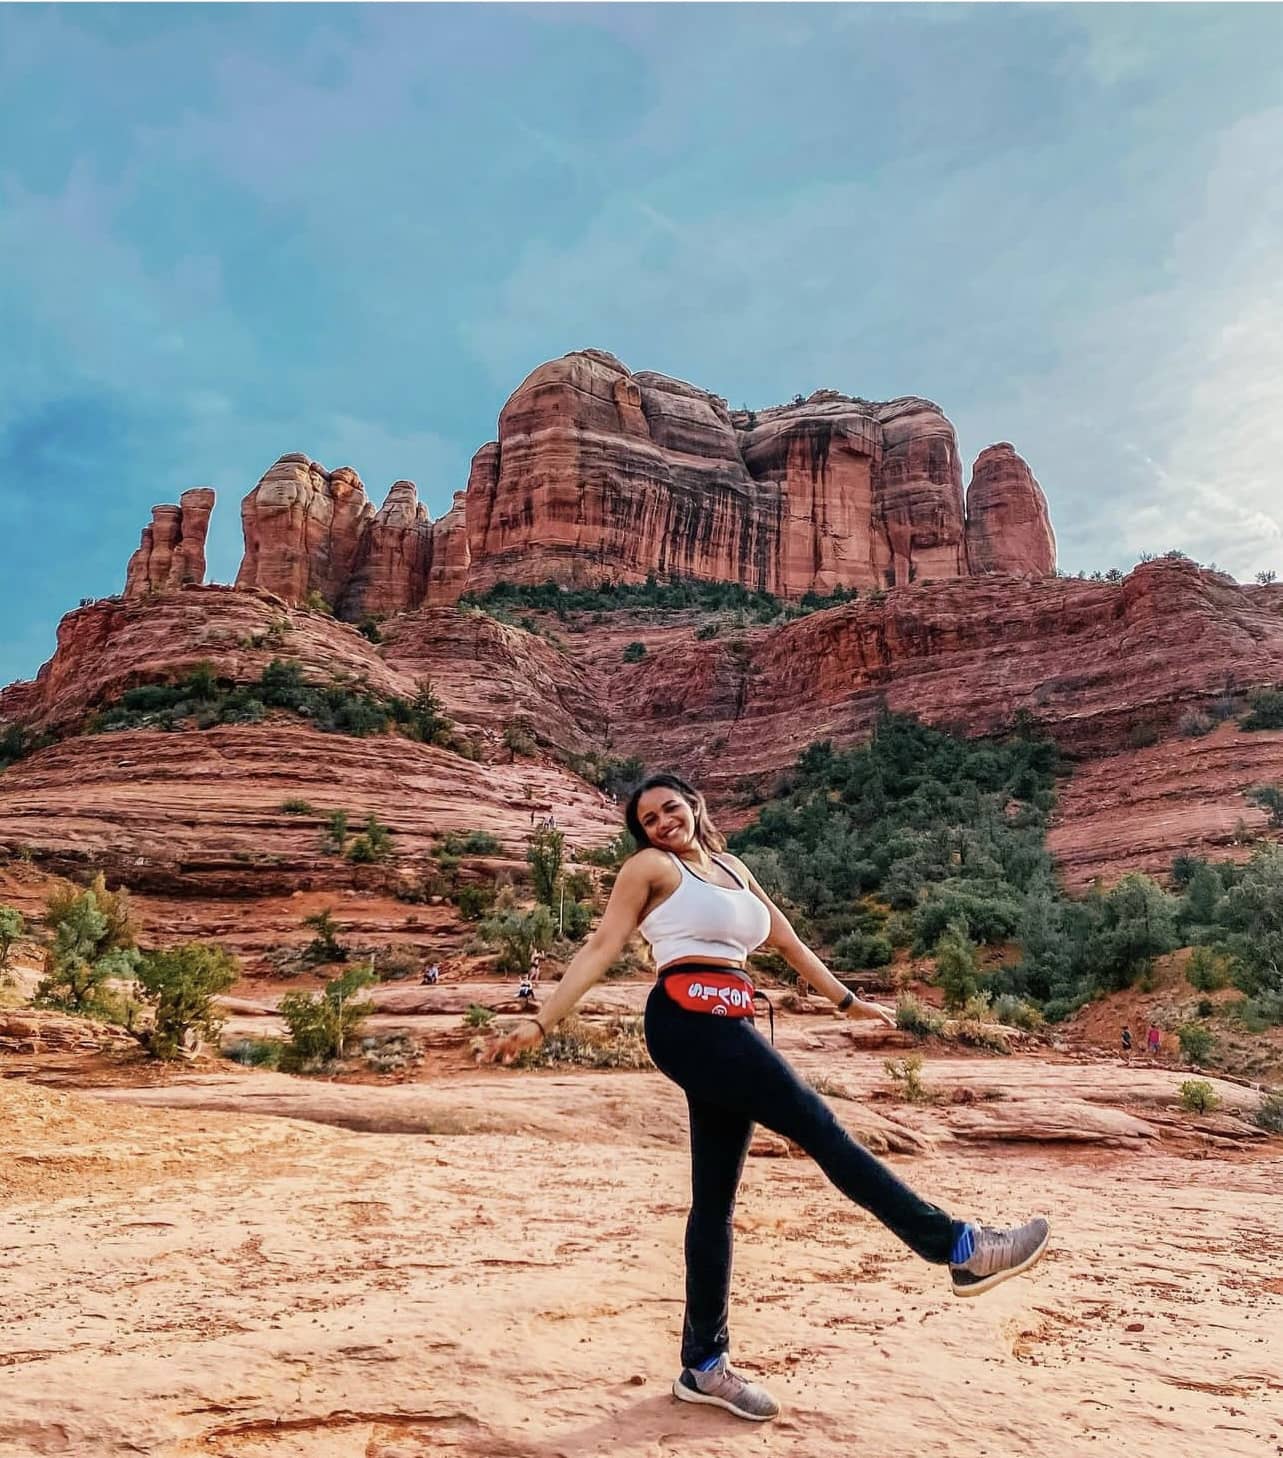 How To Take Great Photos of Yourself When Traveling Alone